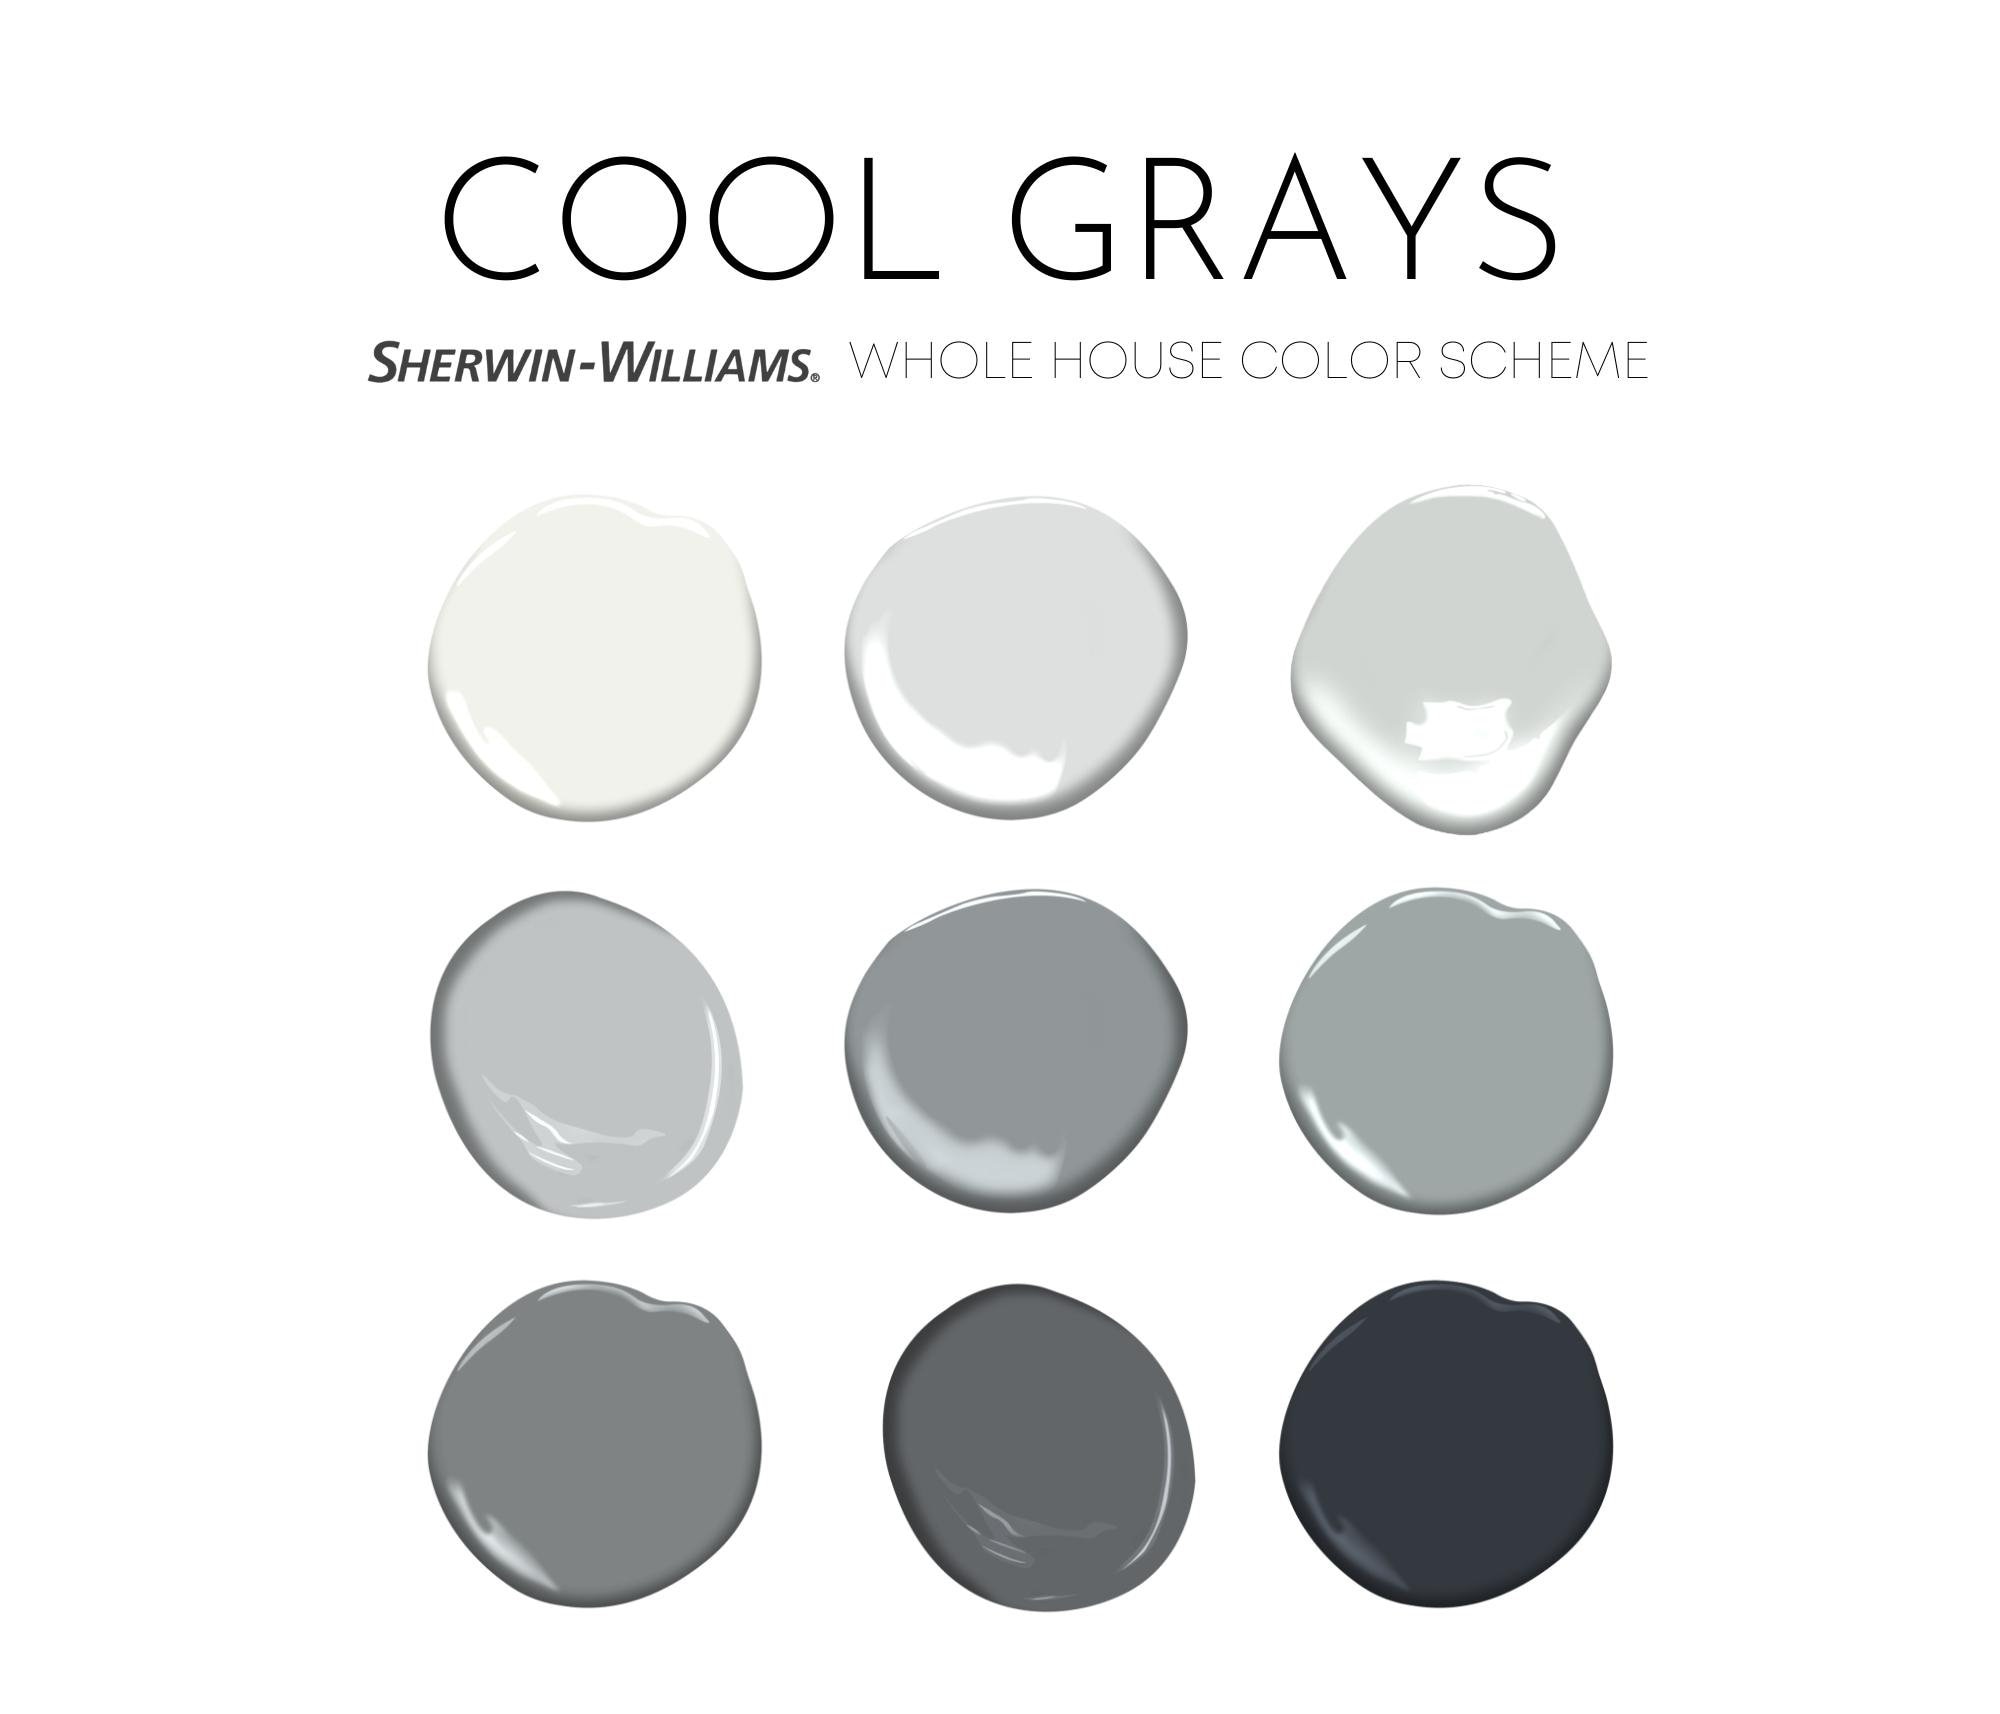 Cool Grays Sherwin Williams Paint Palette Interior Paint - Etsy